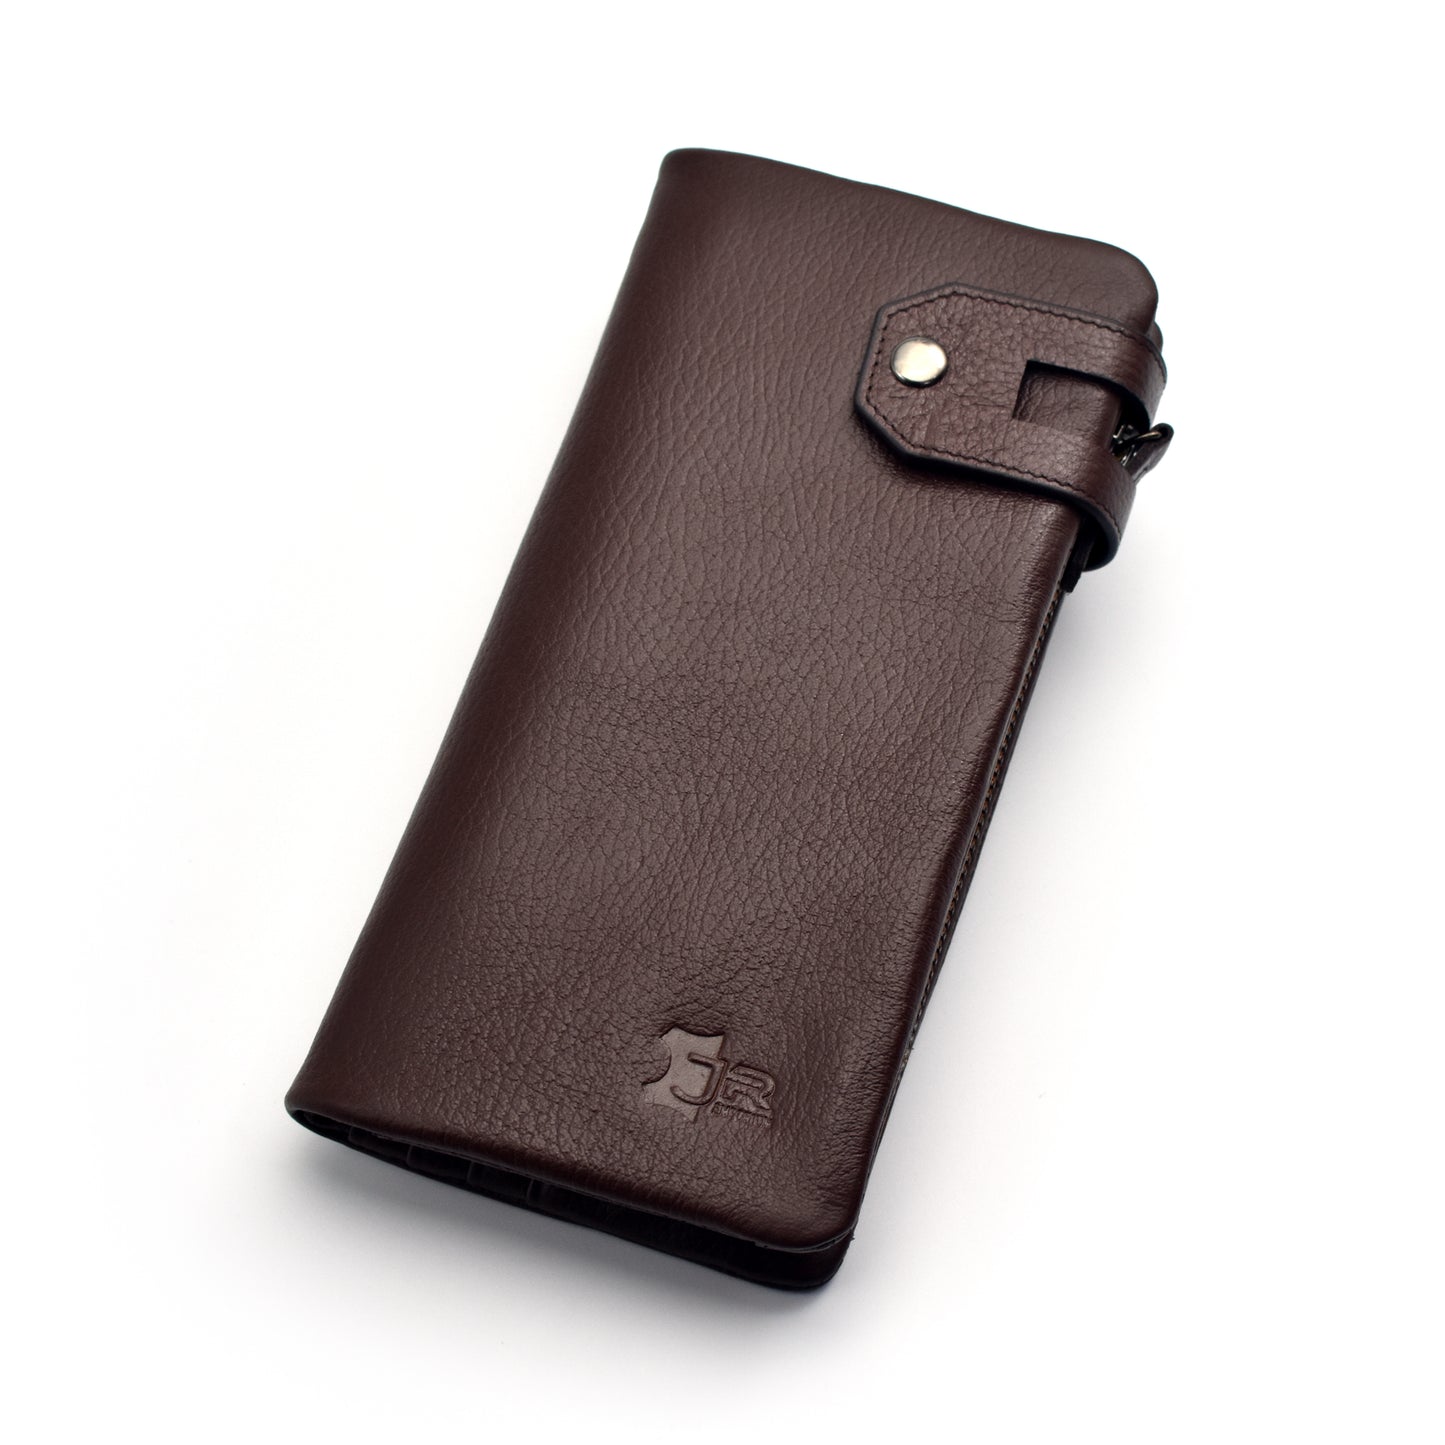 New Premium Quality Original Leather Long Wallet | JP Wallet 72 Chocoalte